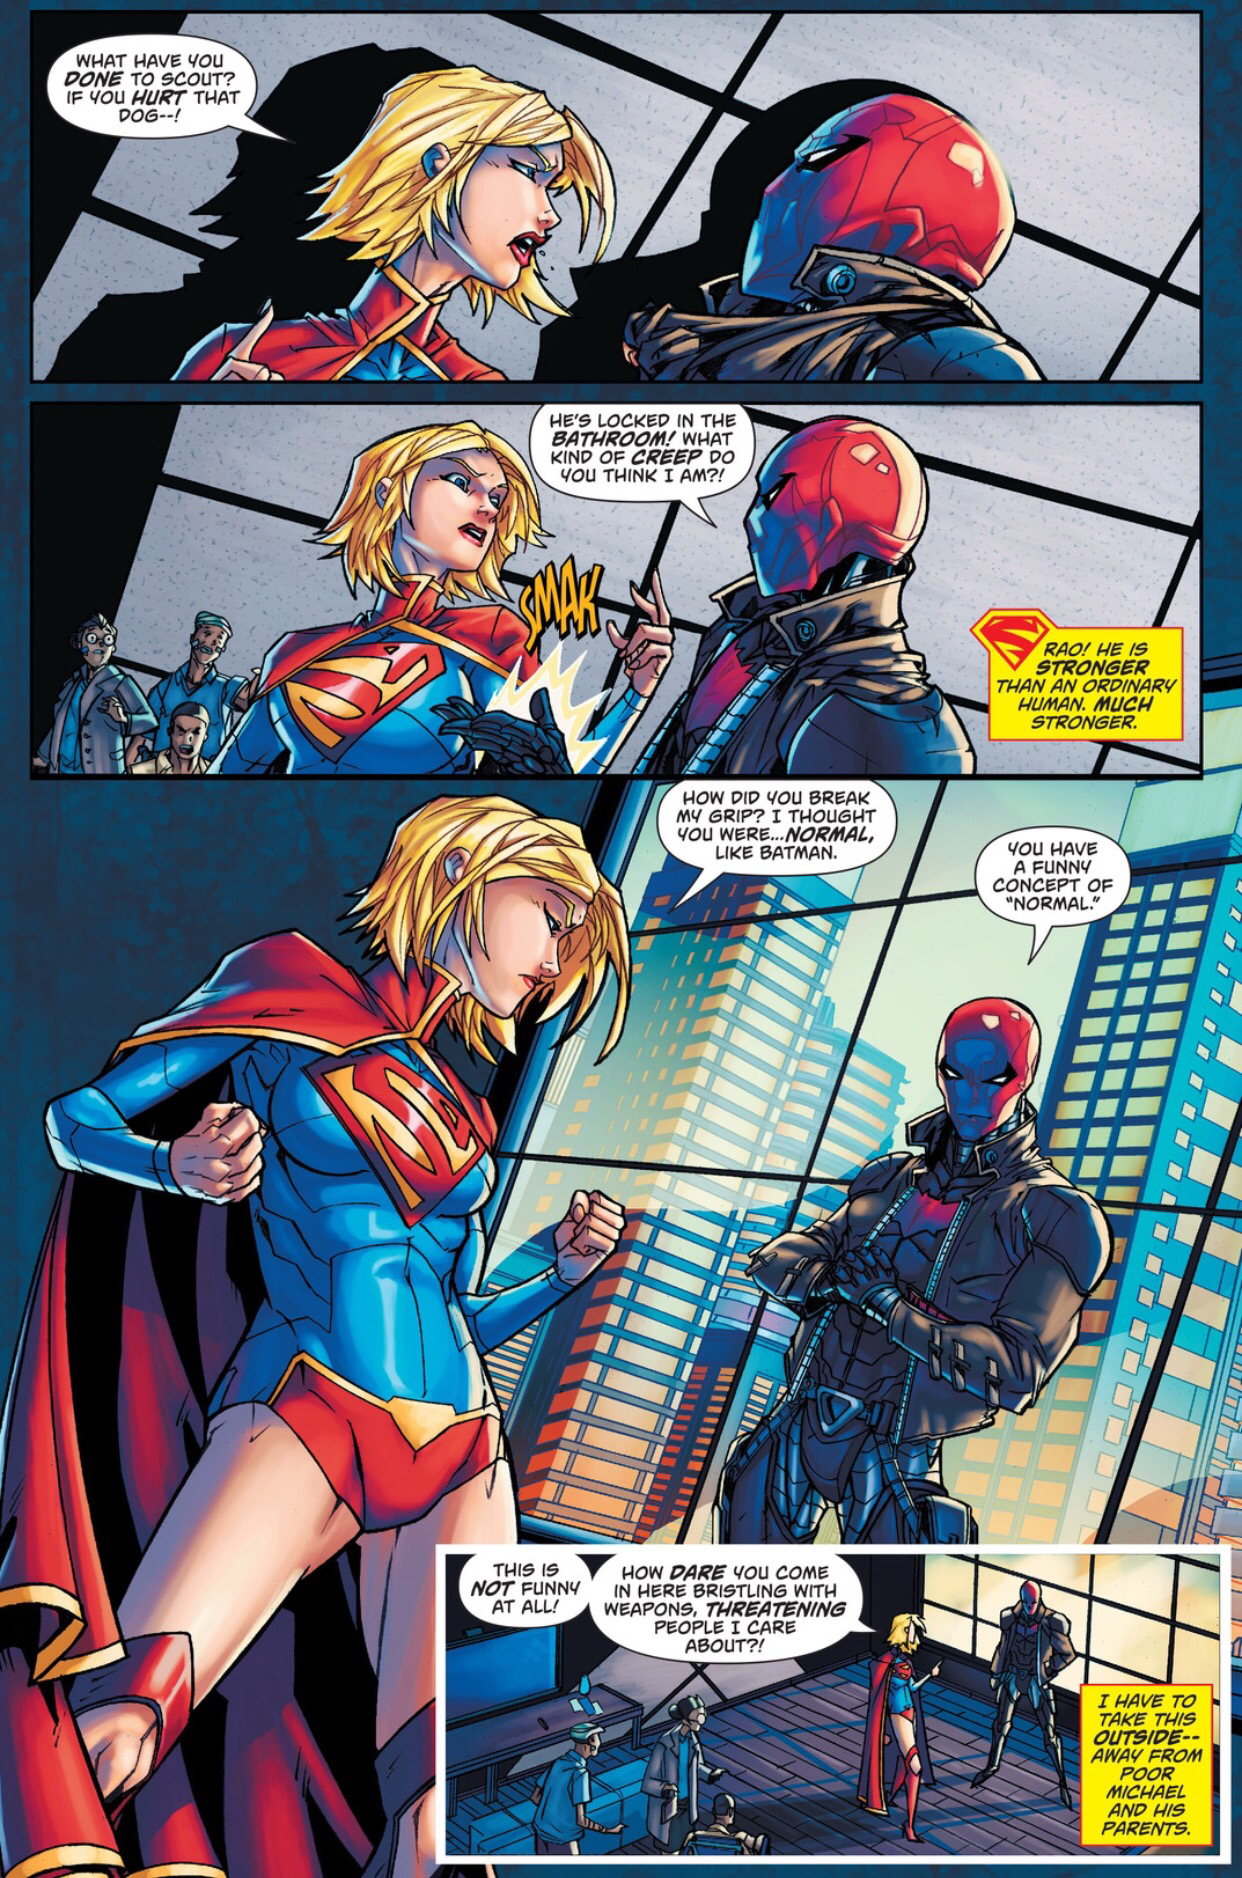 Supergirl meets the Red Hood